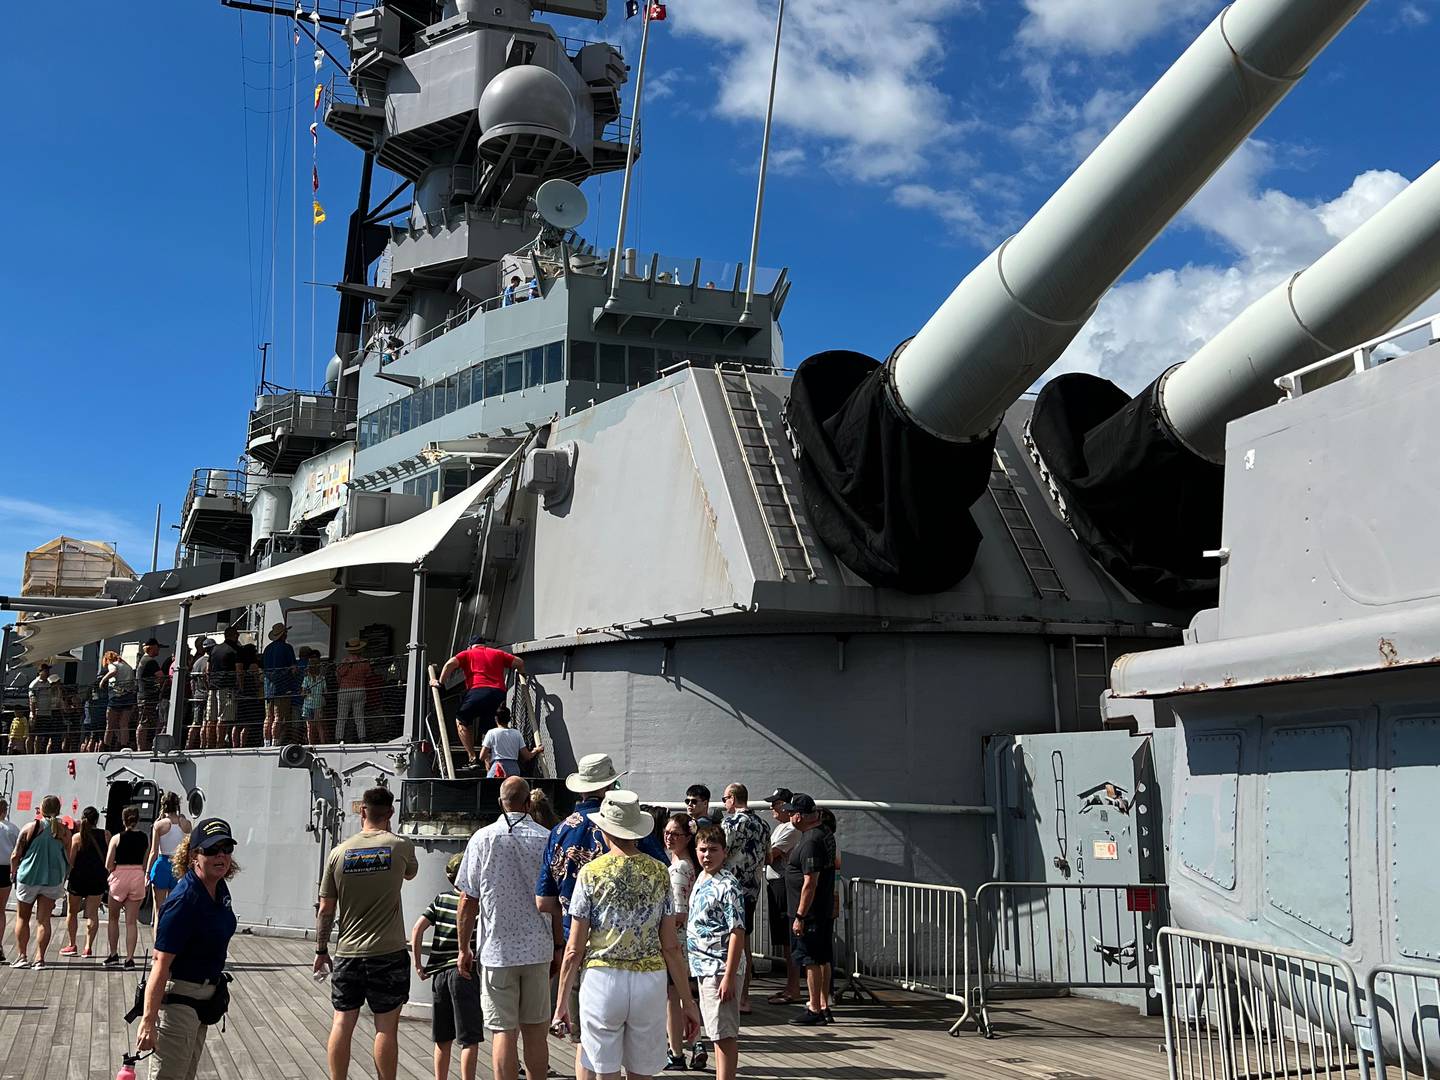 Members of the Johnsburg High School Marching Band tour the USS Missouri and Pearl Harbor on Monday, Dec. 5, 2022. They are set to march in the annual memorial parade there on Wednesday, the anniversary of the Dec. 7, 1941, attack.